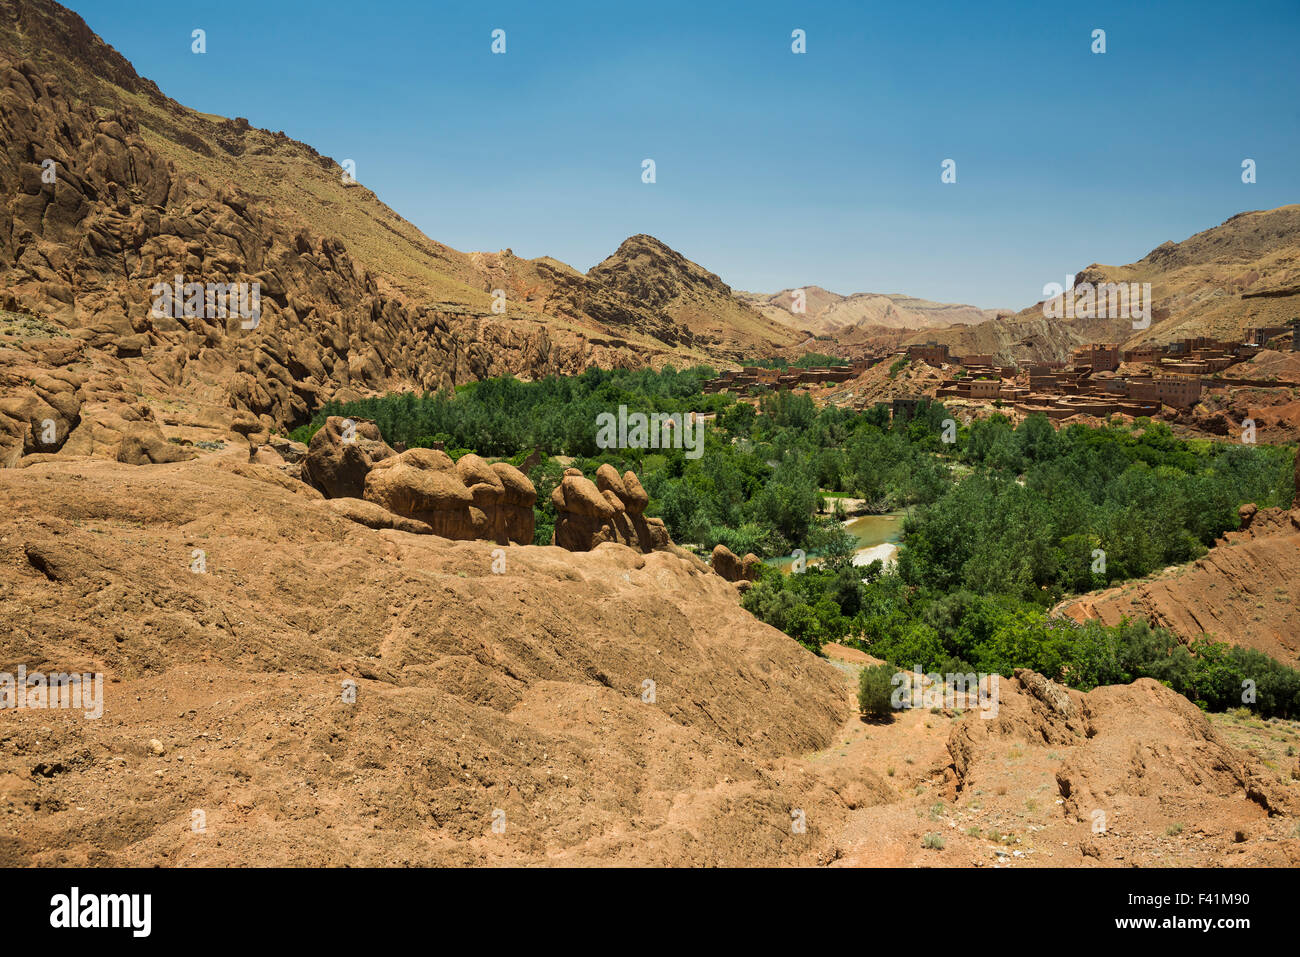 Oasis in Dades Gorge, Dades Valley, Boumalne-du-Dades behind, Morocco Stock Photo